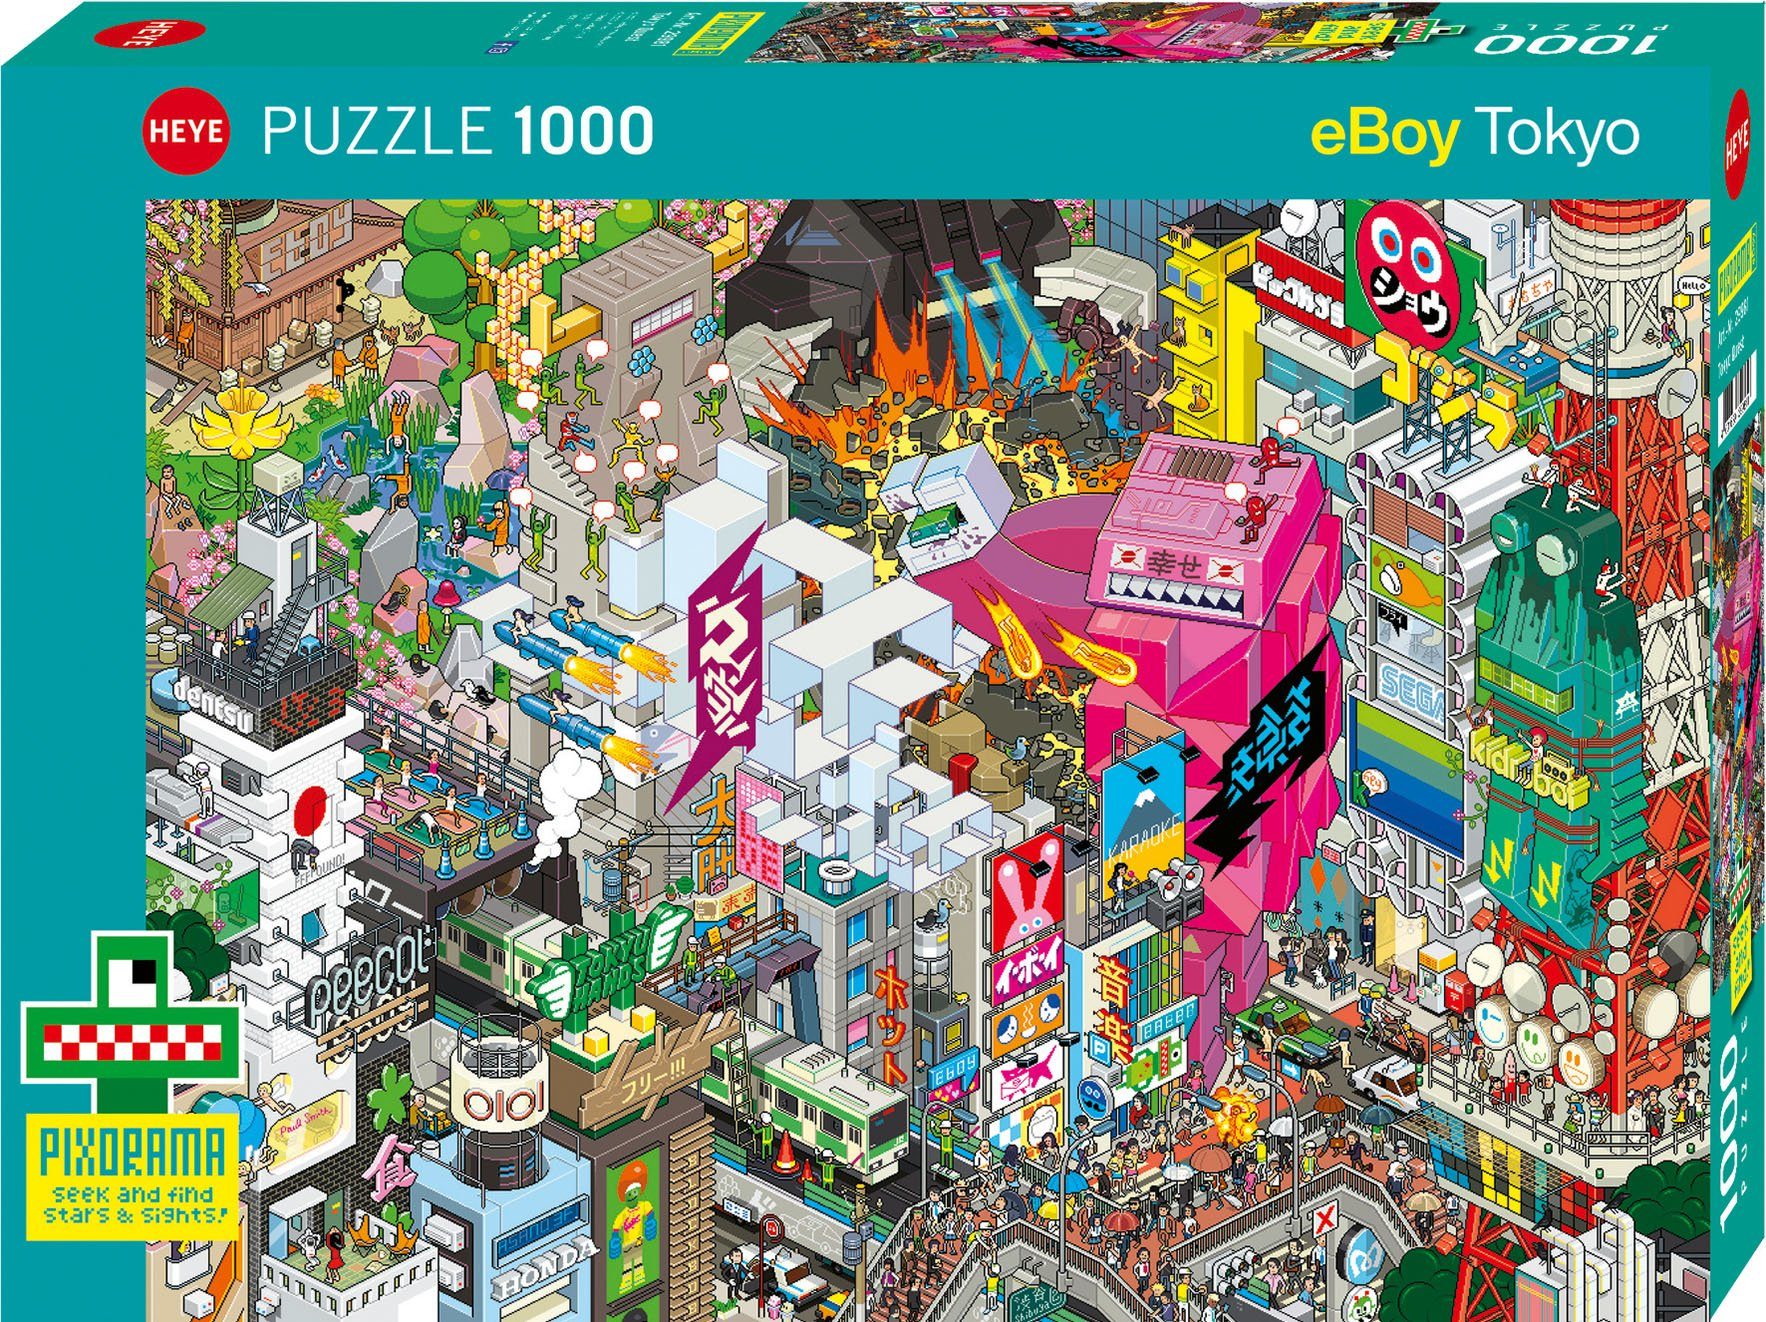 HEYE Puzzle Tokyo Quest, 1000 Puzzleteile, Made in Germany